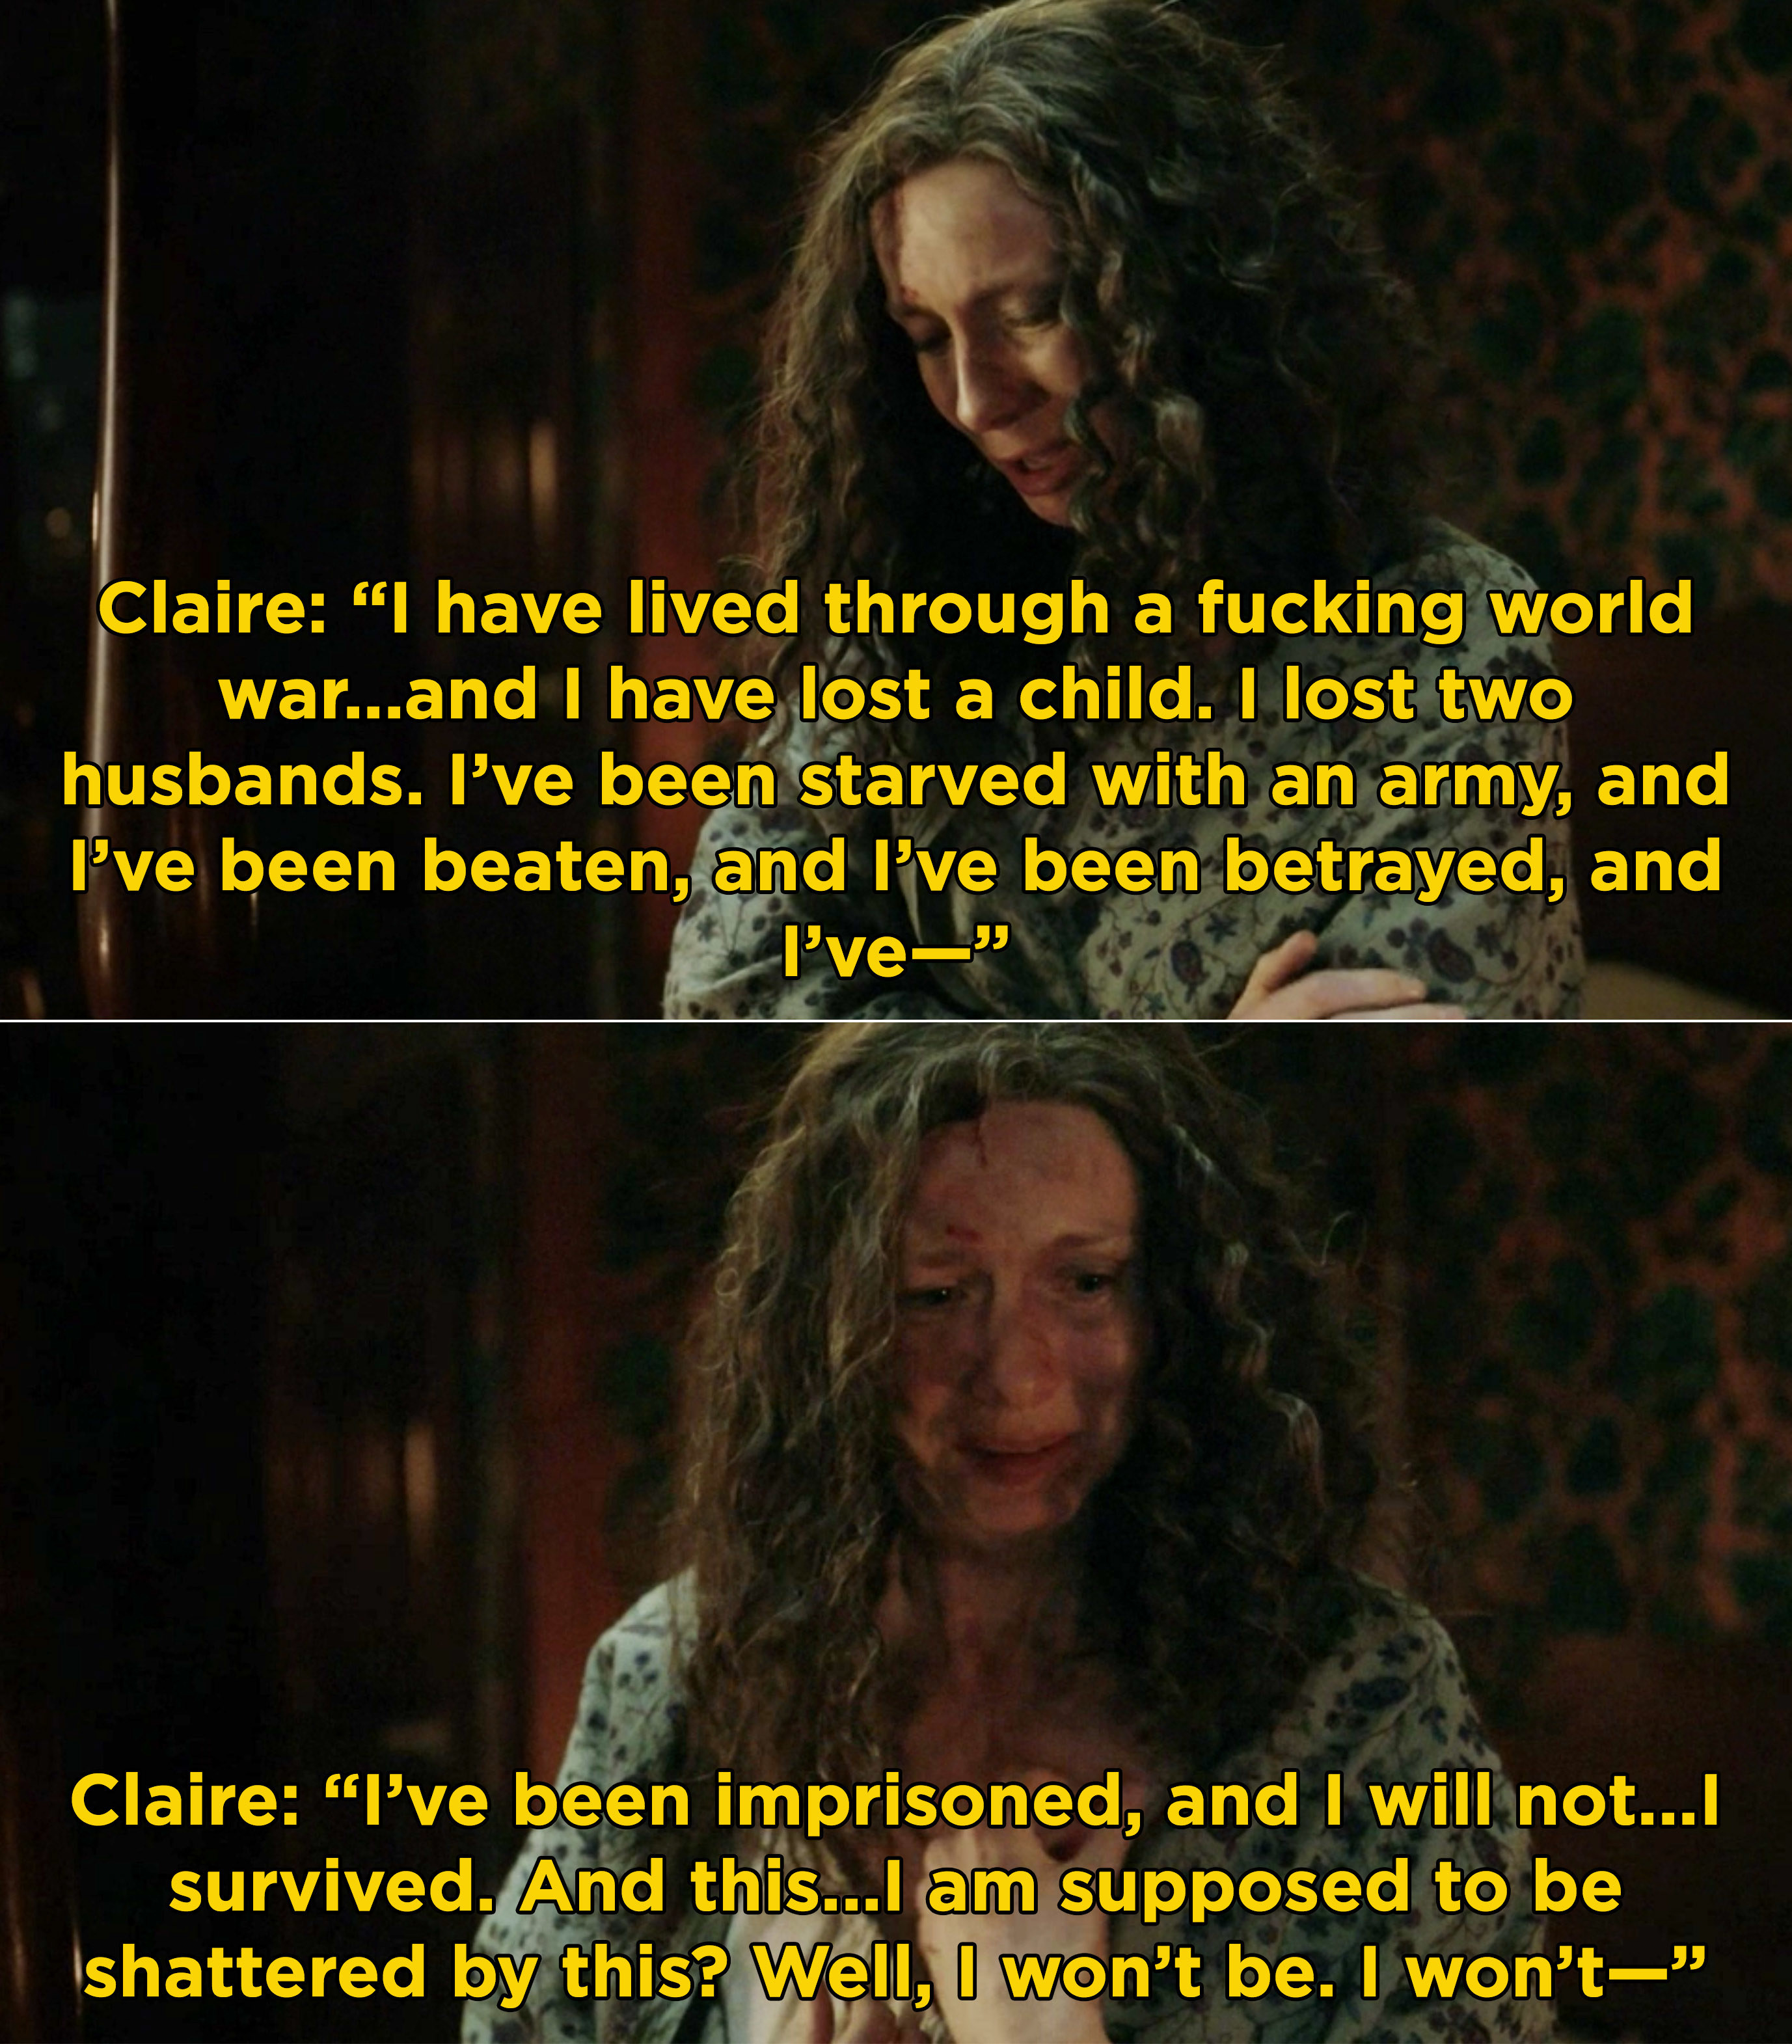 Claire listing off everything she's been through and saying she won't be "shattered" by this